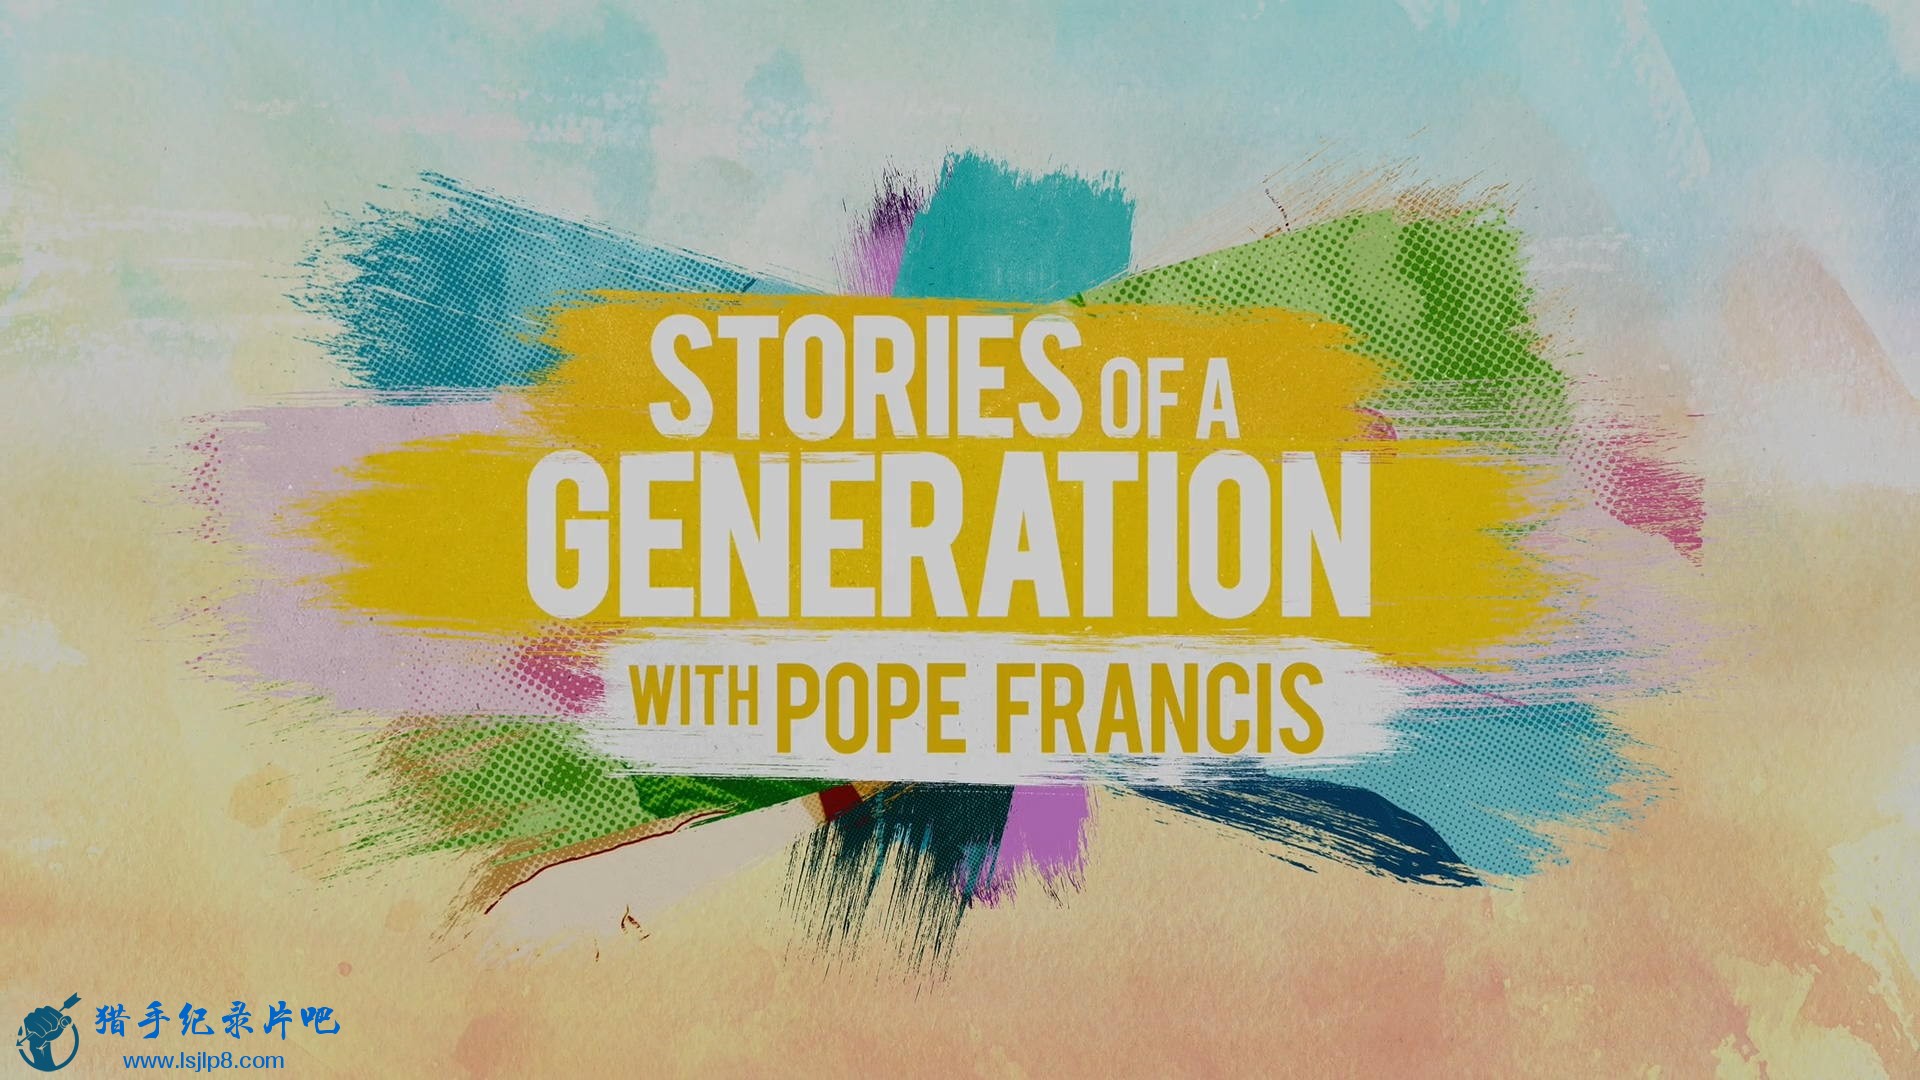 Stories.of.a.Generation.With.Pope.Francis.S01E01.Love.1080p.NF.WEB-DL.DDP5.1.H.264-KHN.jpg